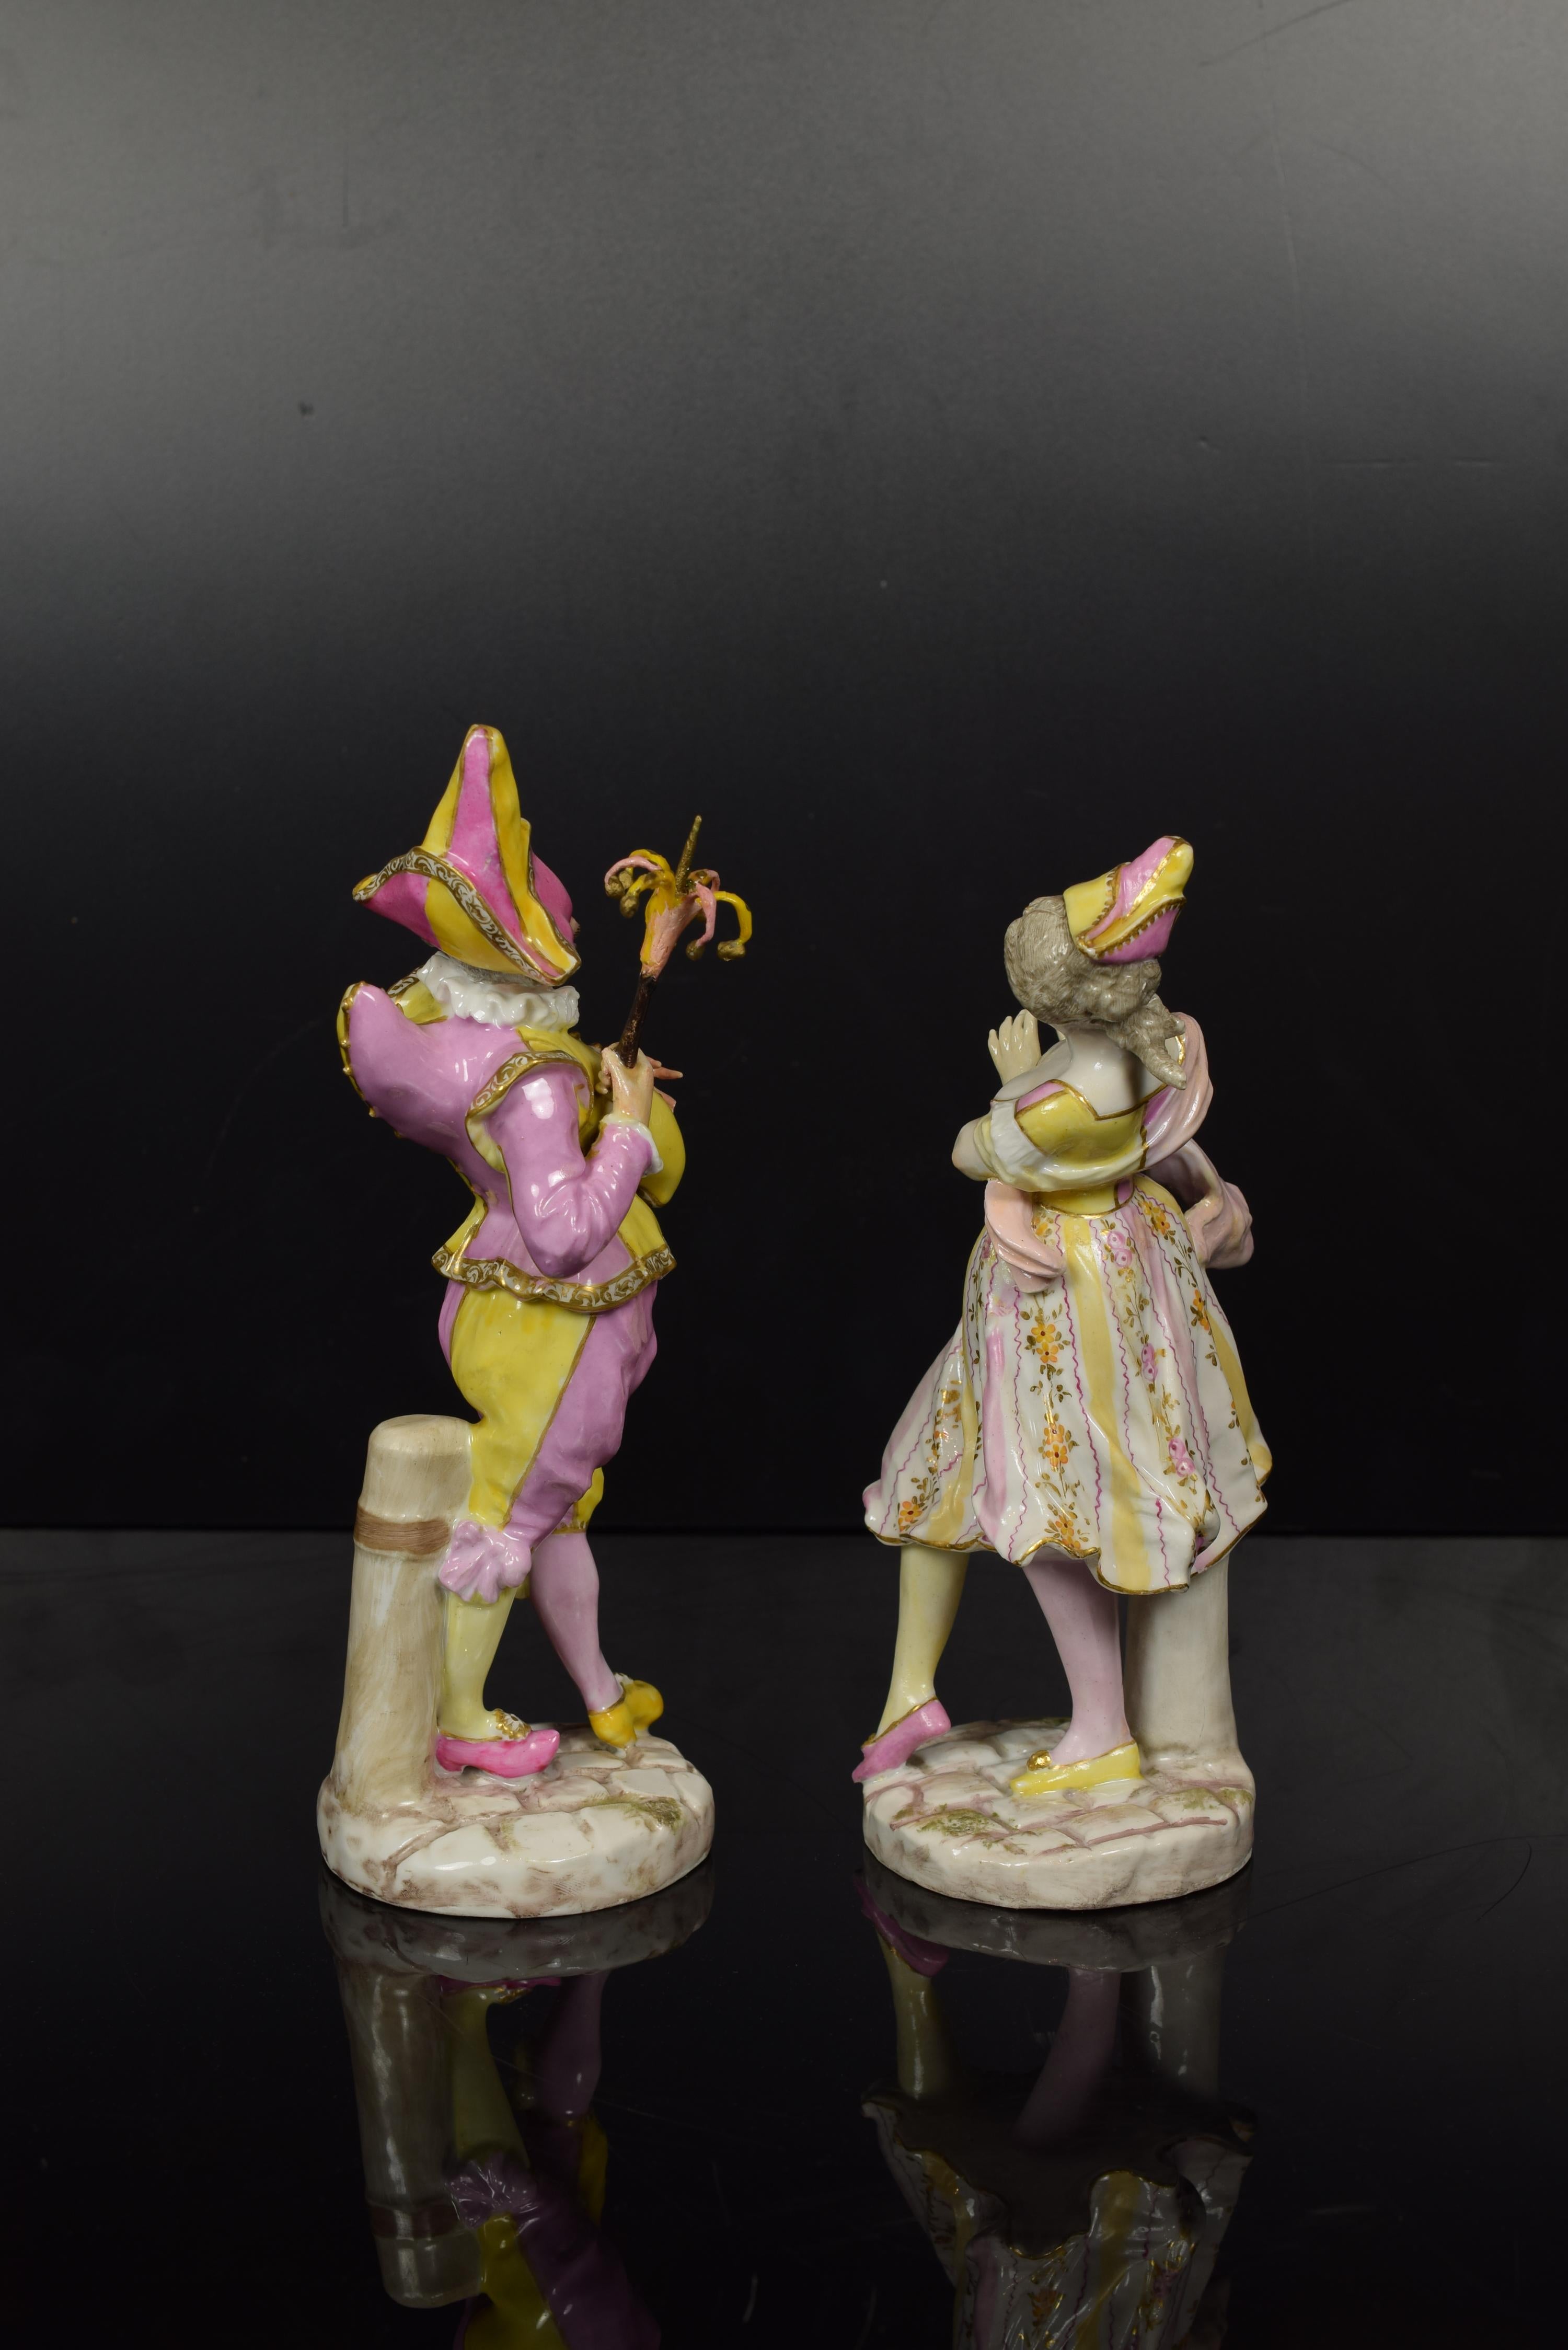 Pair of figures (male and female) each located on a circular base; note that there are colors that are repeated in the clothing of both figures, thus achieving a visual unity for the couple. The models of the Rococo Meissen follow, although the